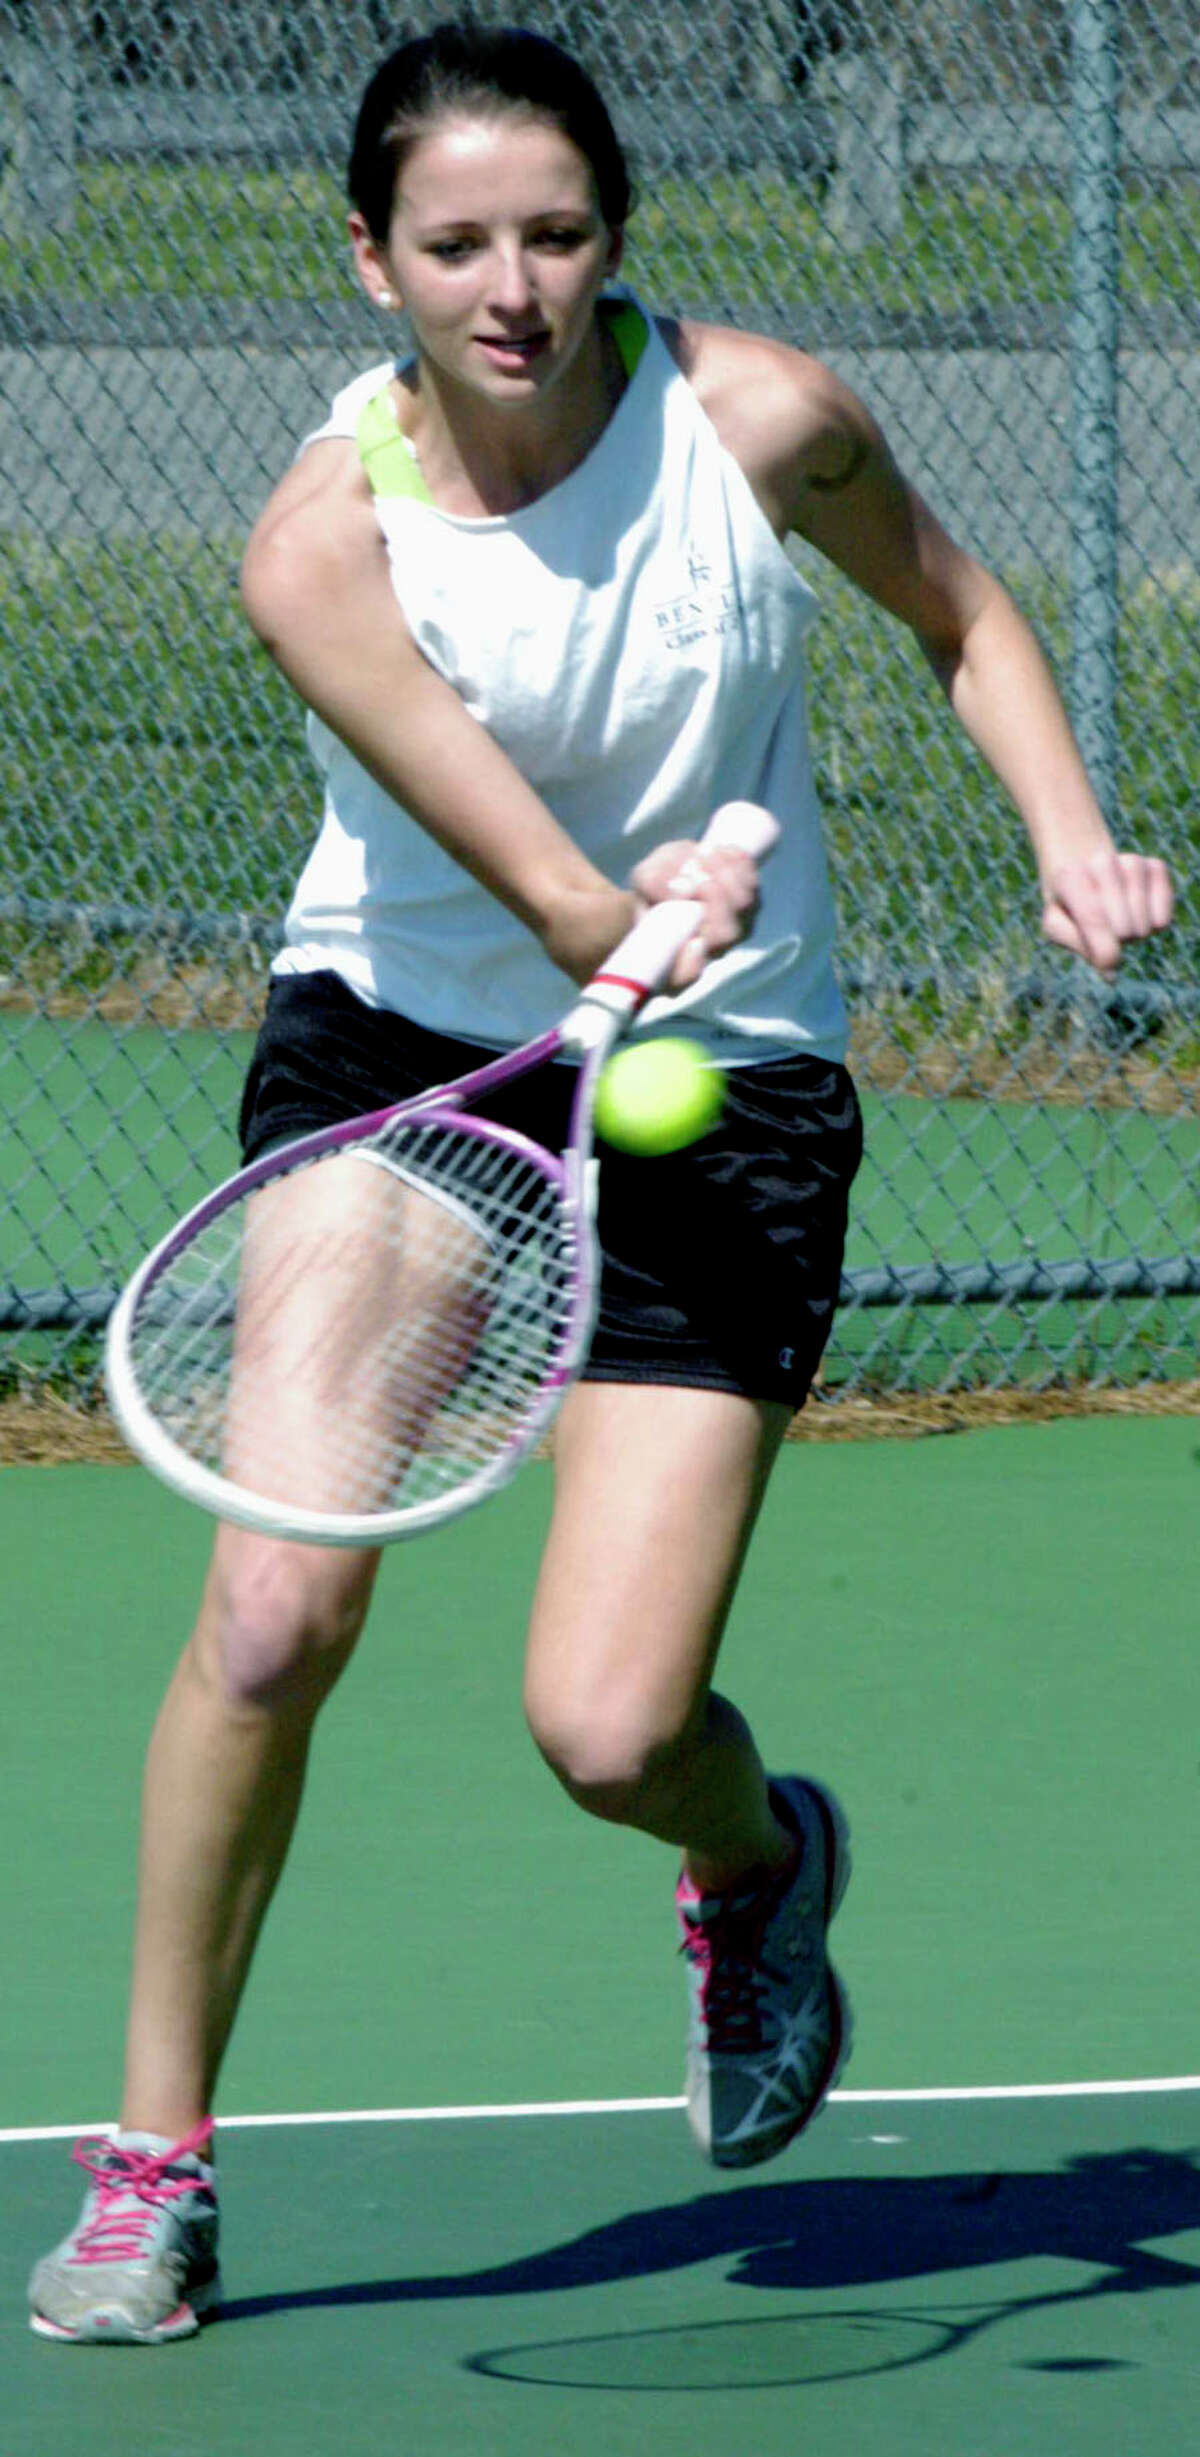 SPECTRUM/The Spartans' Colleen Koslosky demonstrates her mobility as she practices for the Shepaug Valley High School girls' tennis season. April 2012